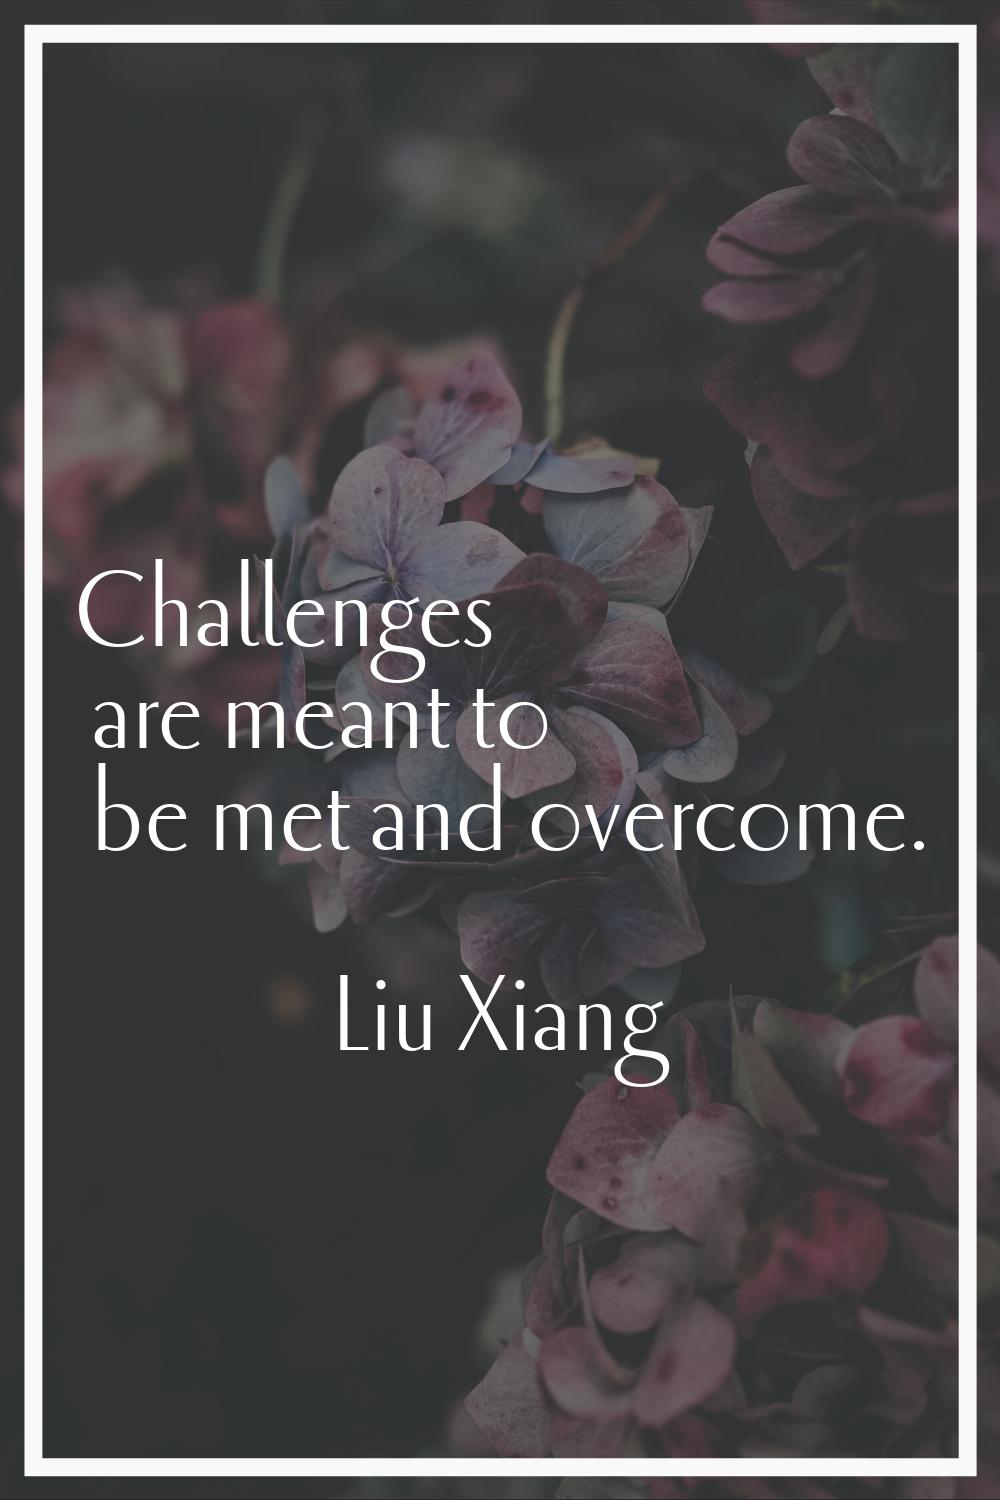 Challenges are meant to be met and overcome.